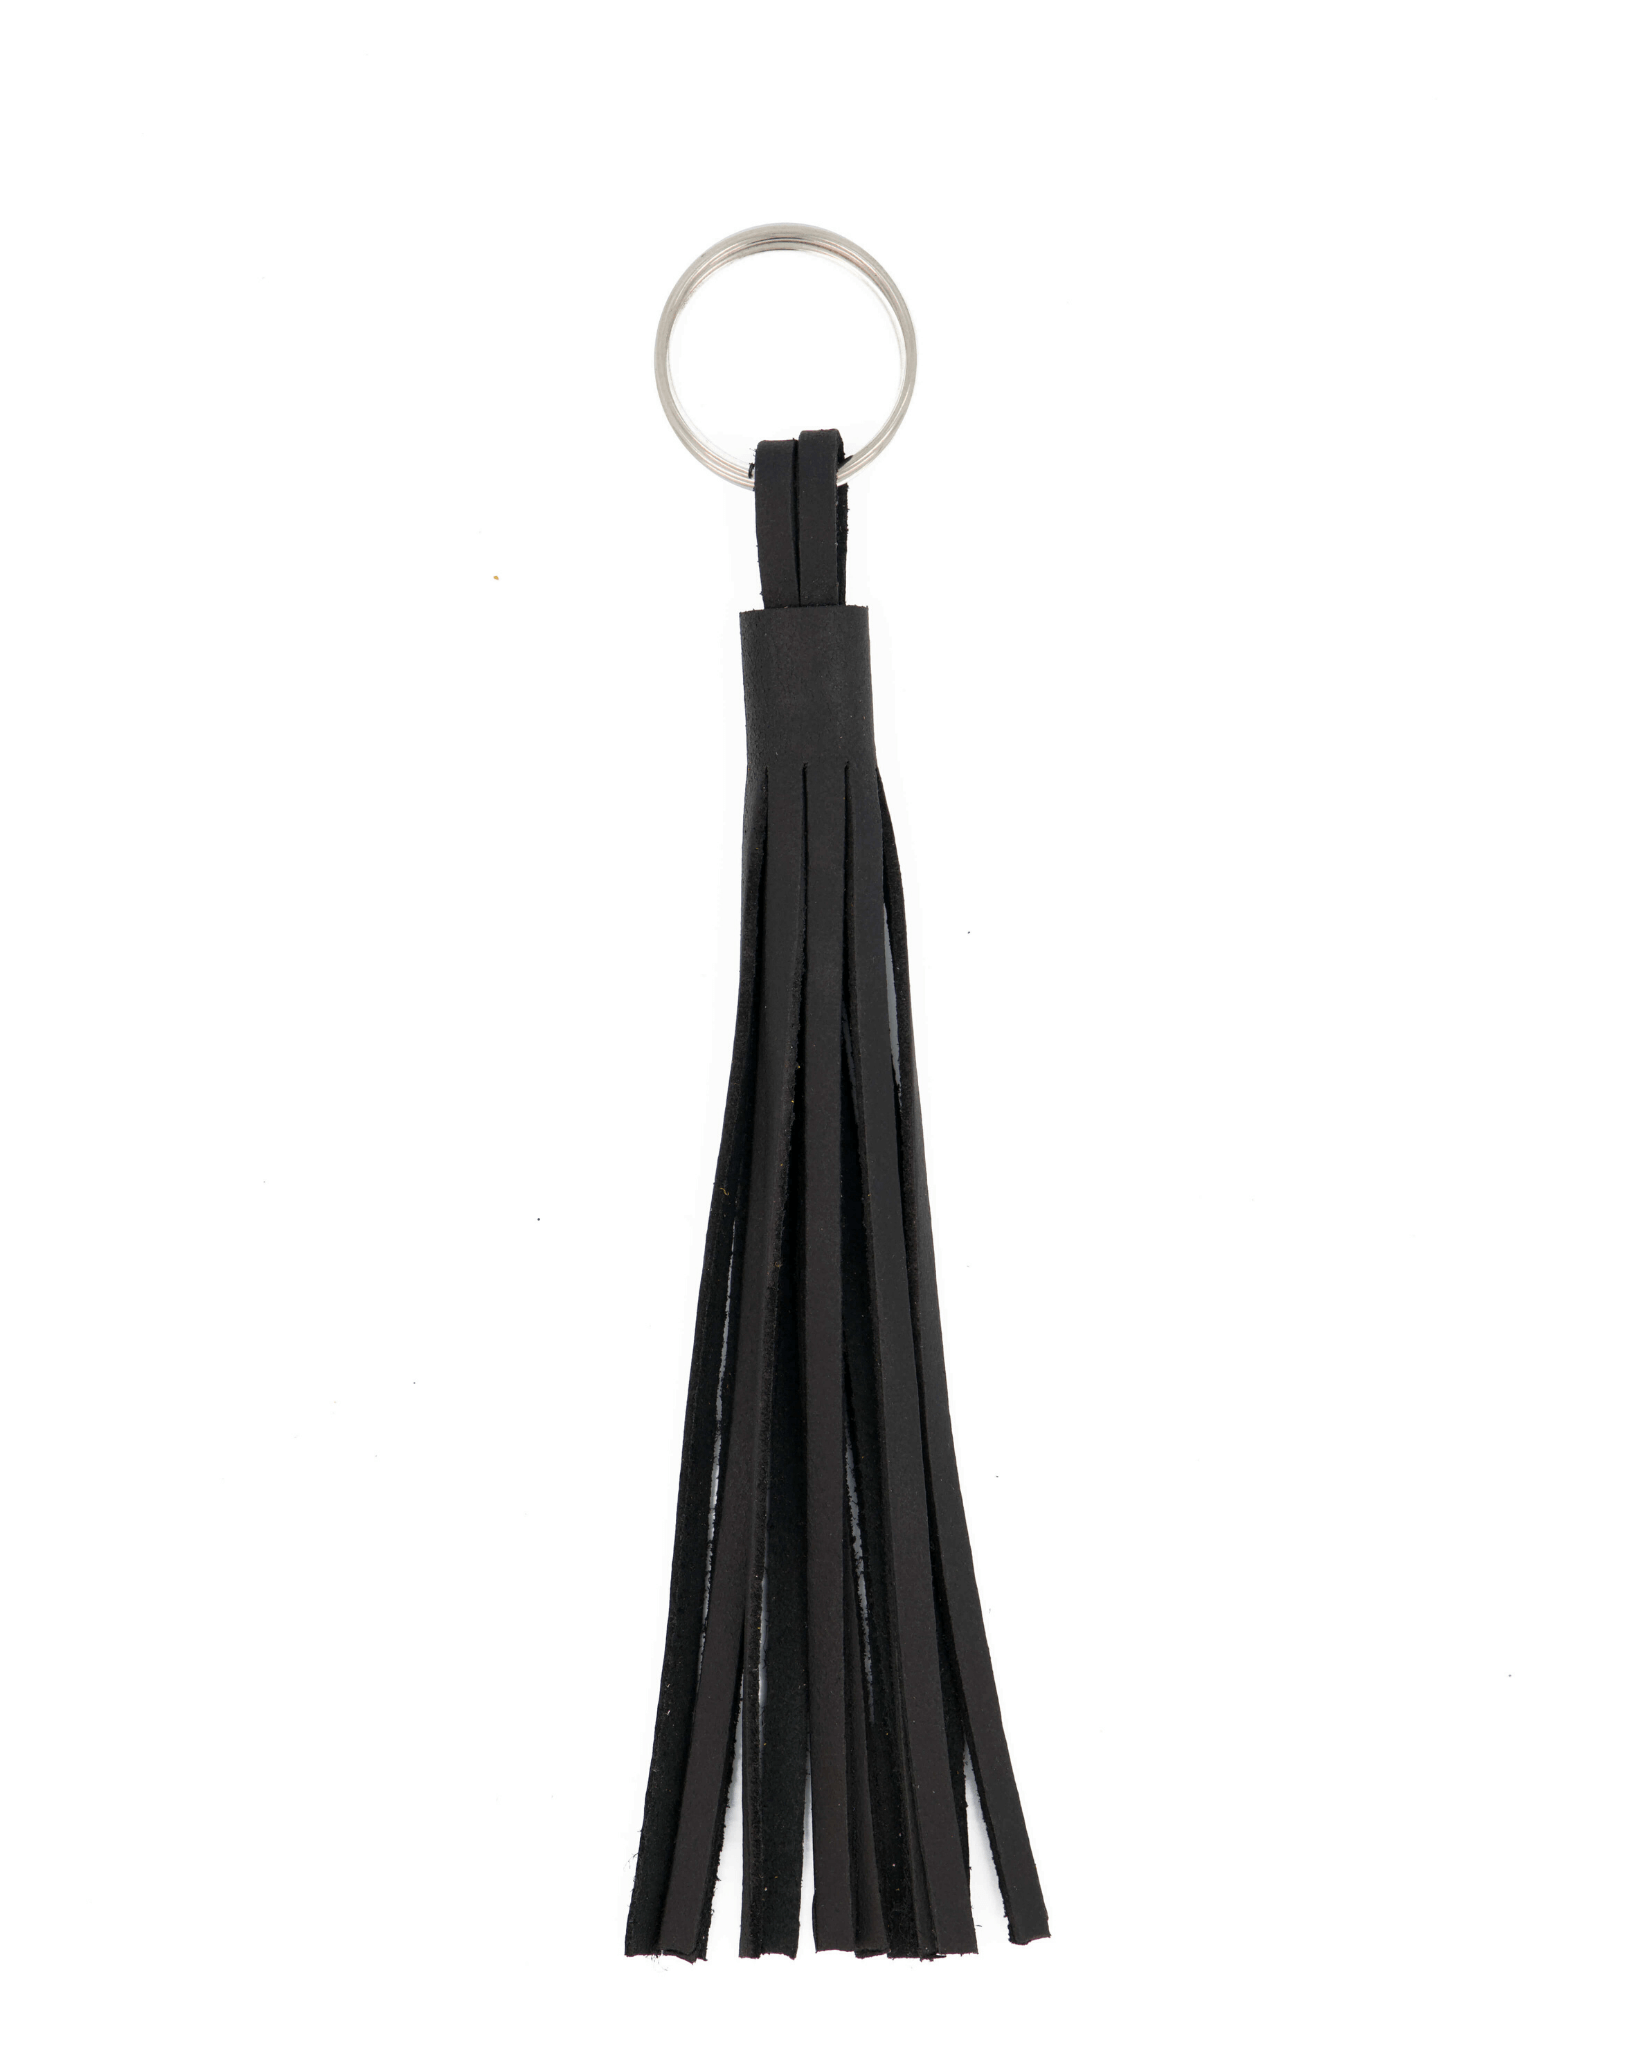 Personalized name keychain, women car accessories, leather tassel keychain, leather bag charm, leather keychain, key holder, small gift, accessories, personalized gift, girlfriend gift, sweet 16 gift, women's gift, simple design,Keychains With Tassels